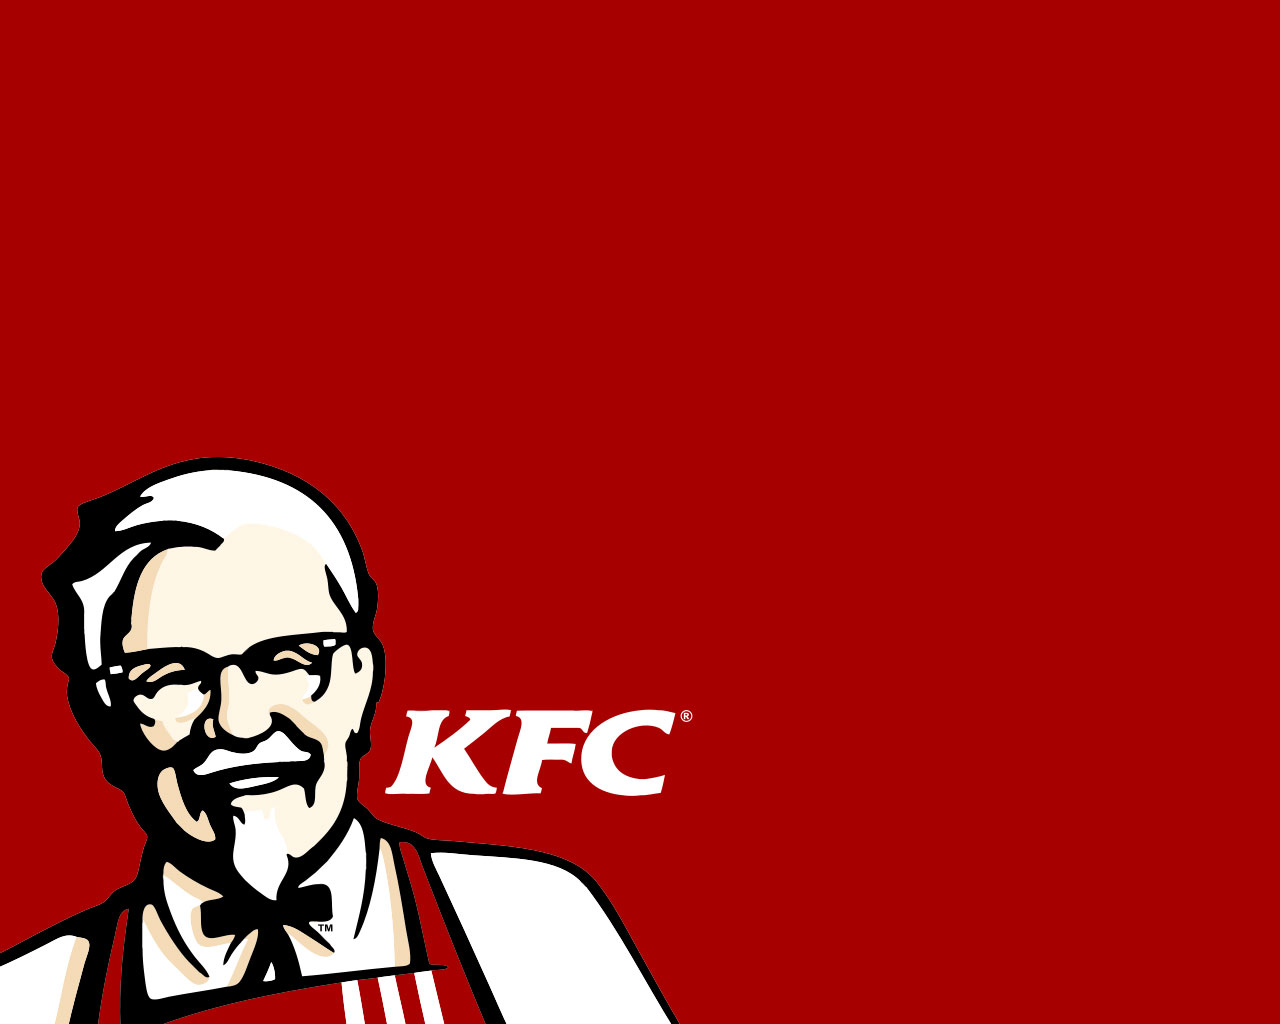 ... colonel sanders kfc best widescreen background awesome ...